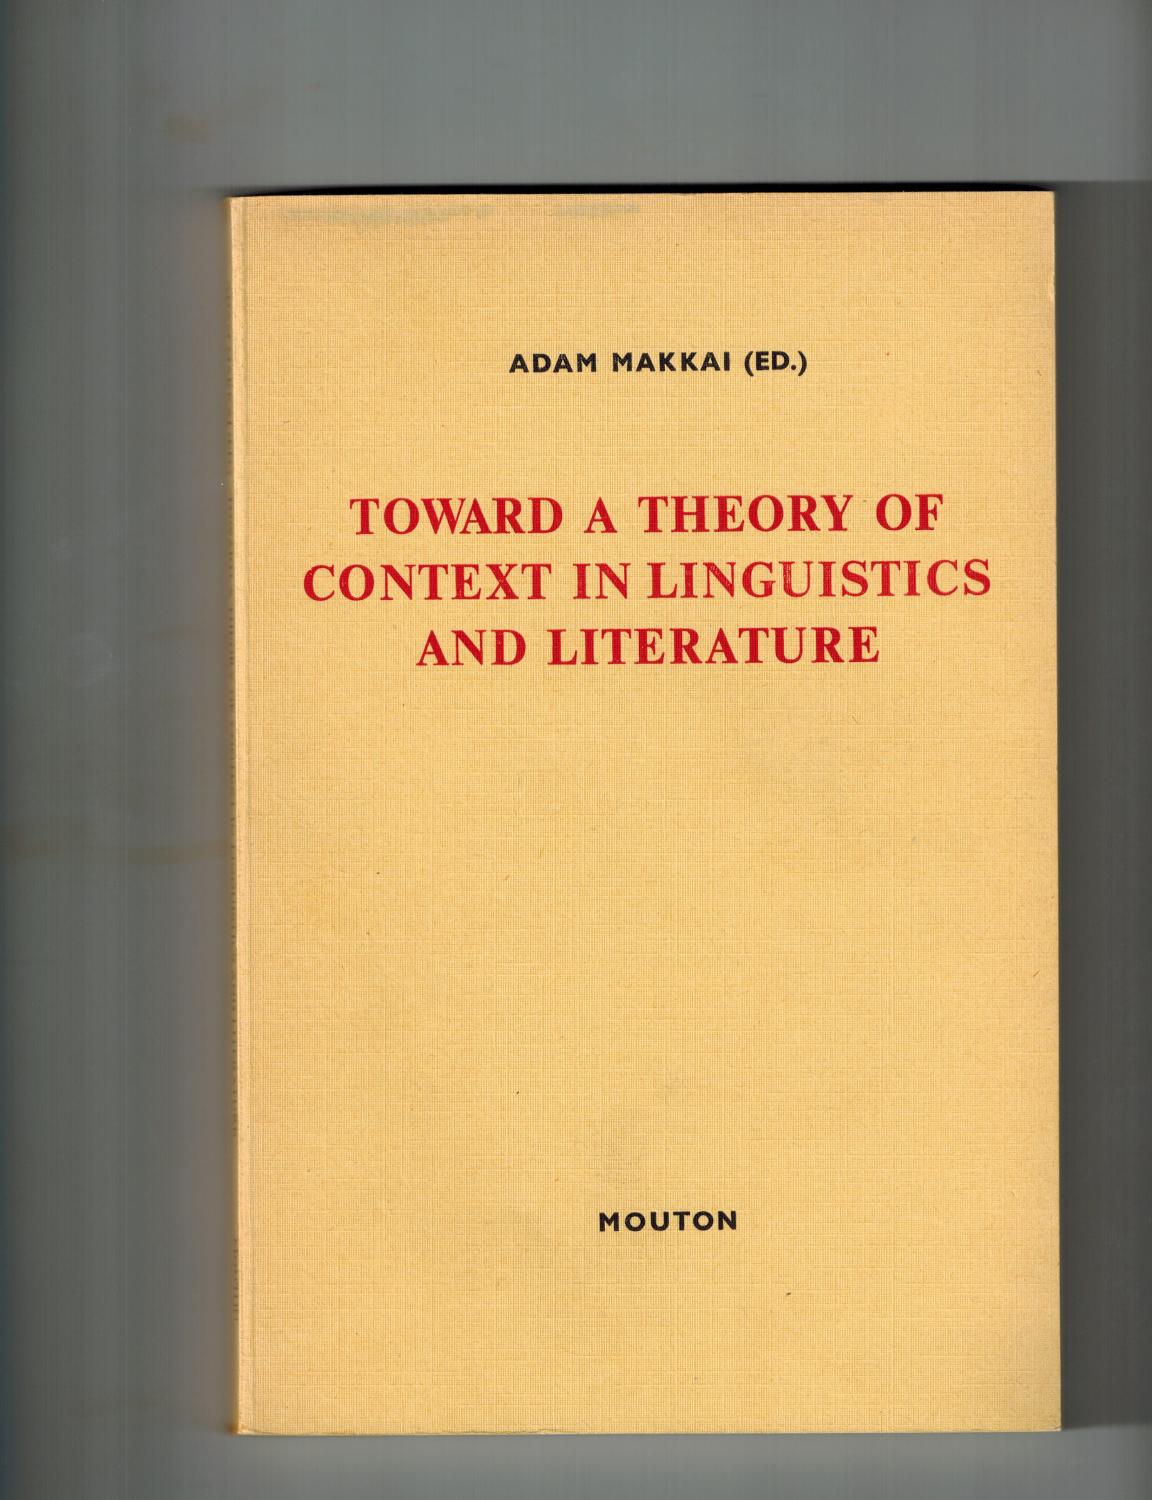 Toward a Theory of Context in Linguistics and Literature: Proceedings of a Conference of the Kelemen Mikes Hungarian Cultural Society, Maastricht, Sep